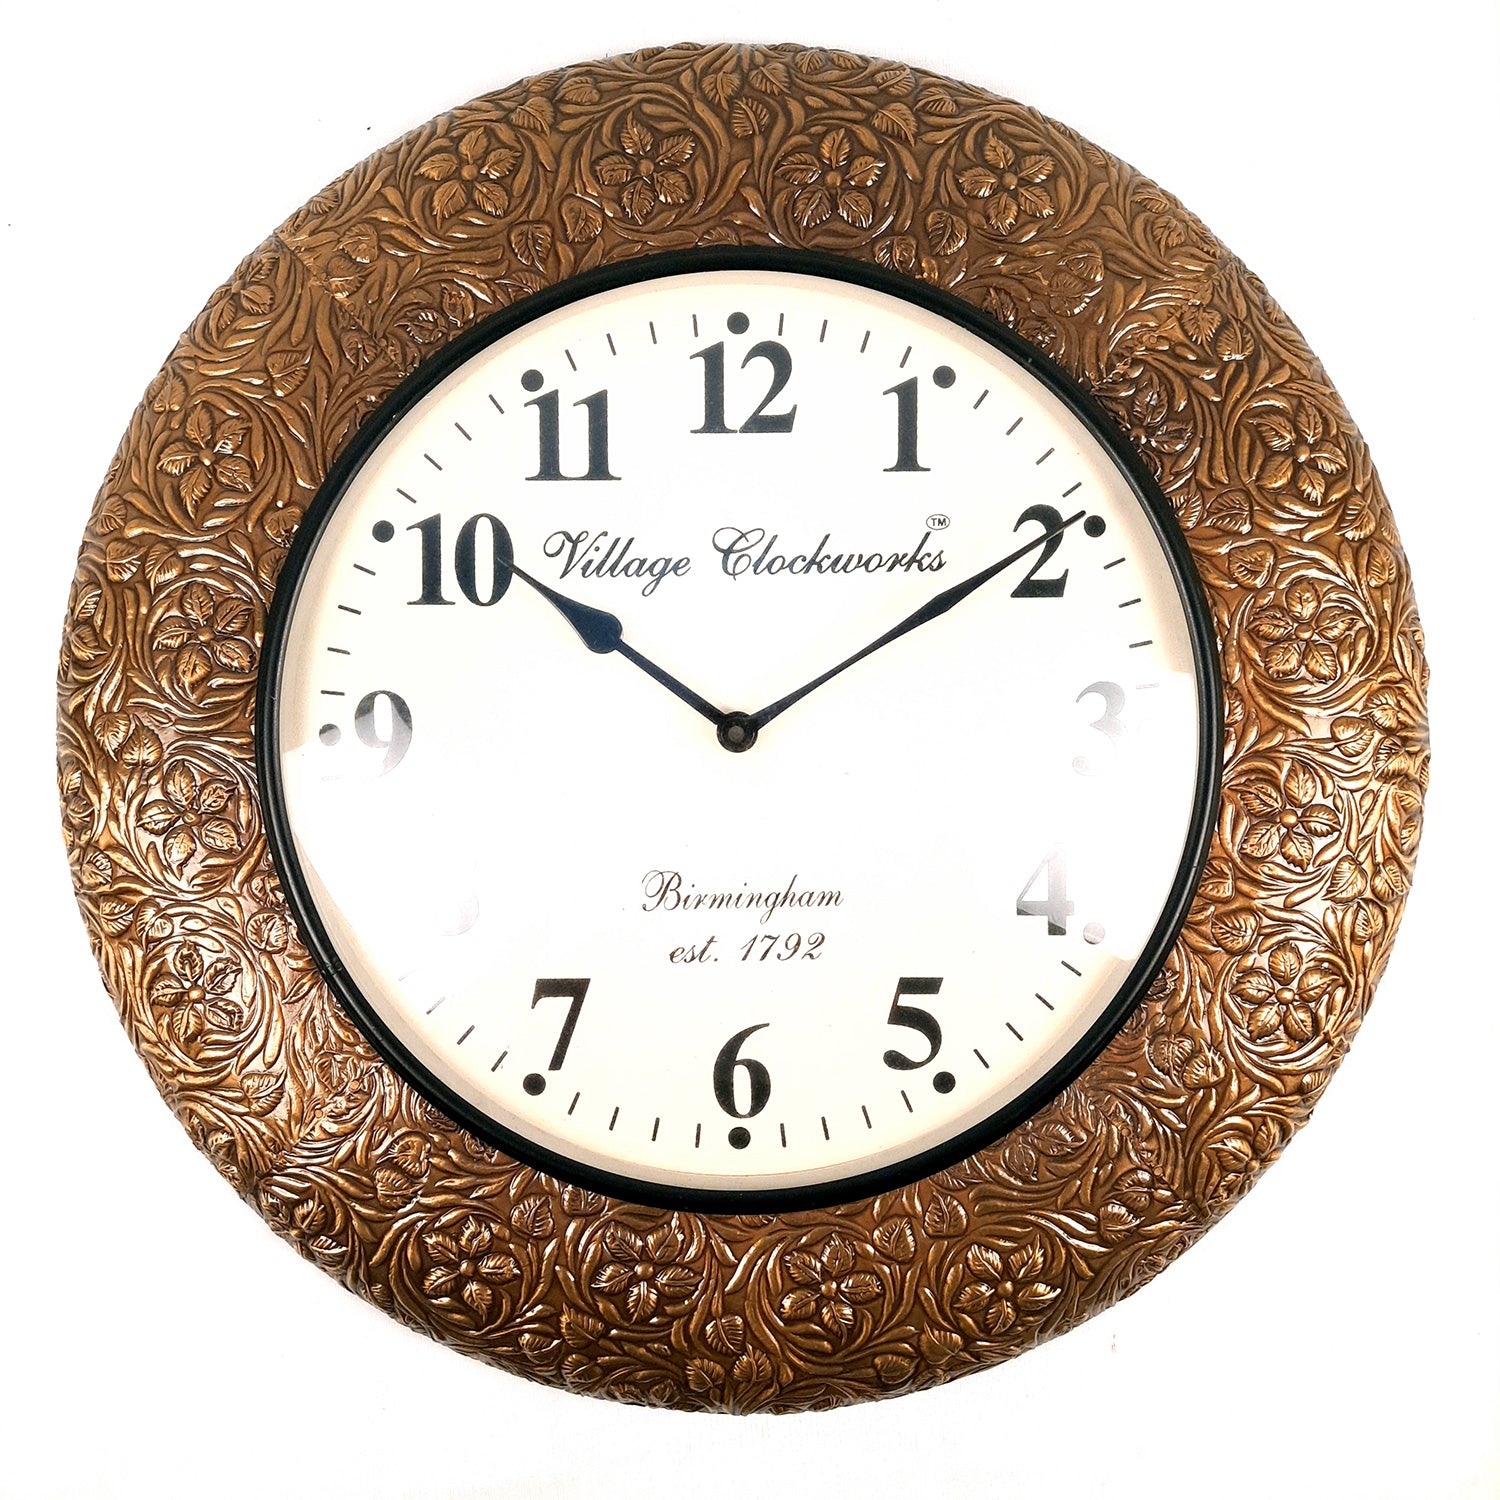 Wall Clock Wooden | Hanging Analog Clock With Antique Brass Work - For Home, Living Room, Bedroom, Office & Hall Decoration | Wedding & Housewarming Gift -18 Inches - Apkamart